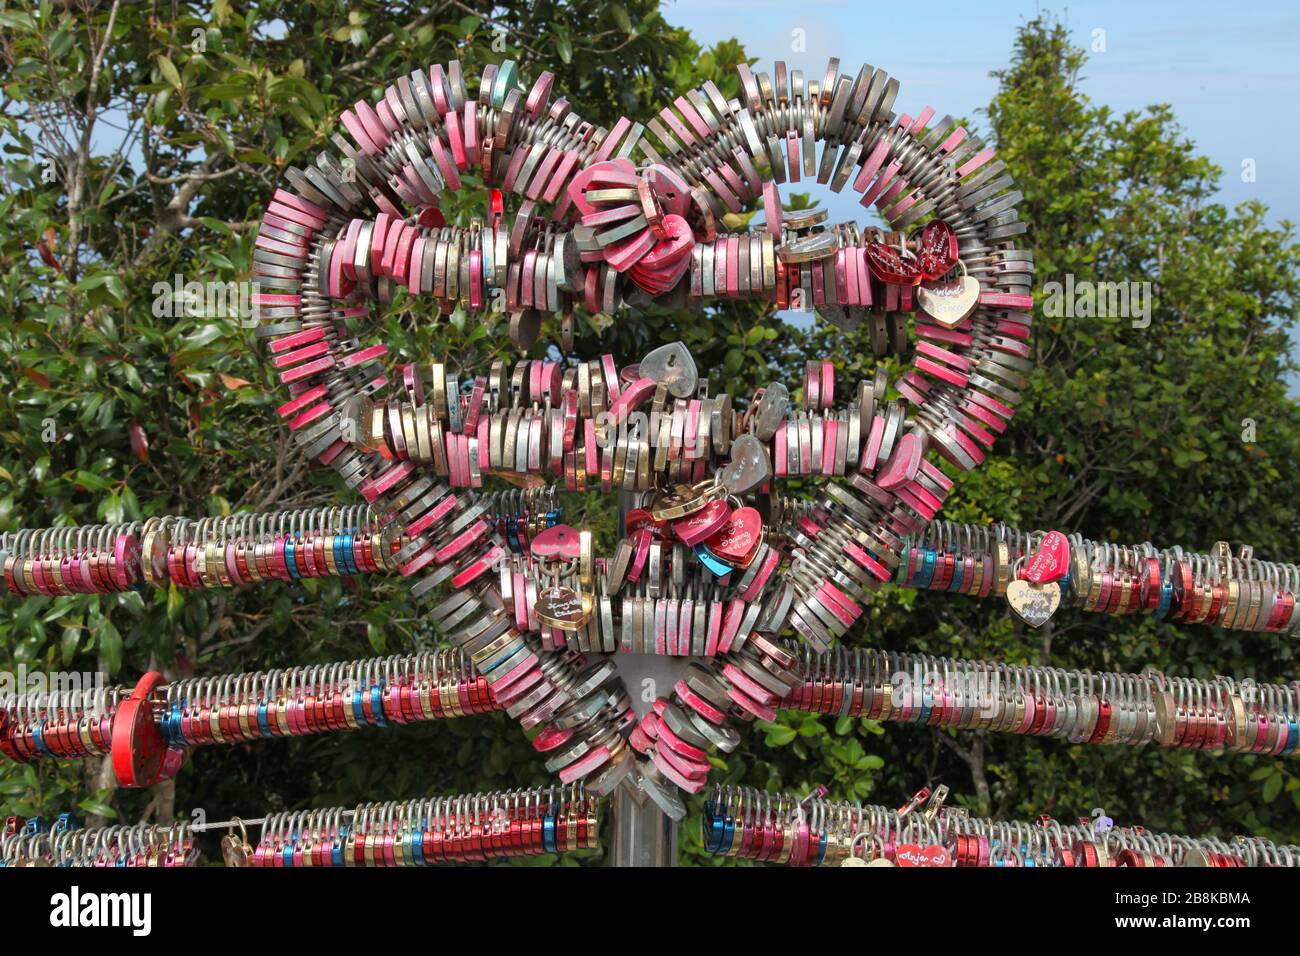 Display of romantic love padlocks, or love locks, attached to fence in the shape of a heart at the top of mountain in Langkawi, Malaysia Stock Photo